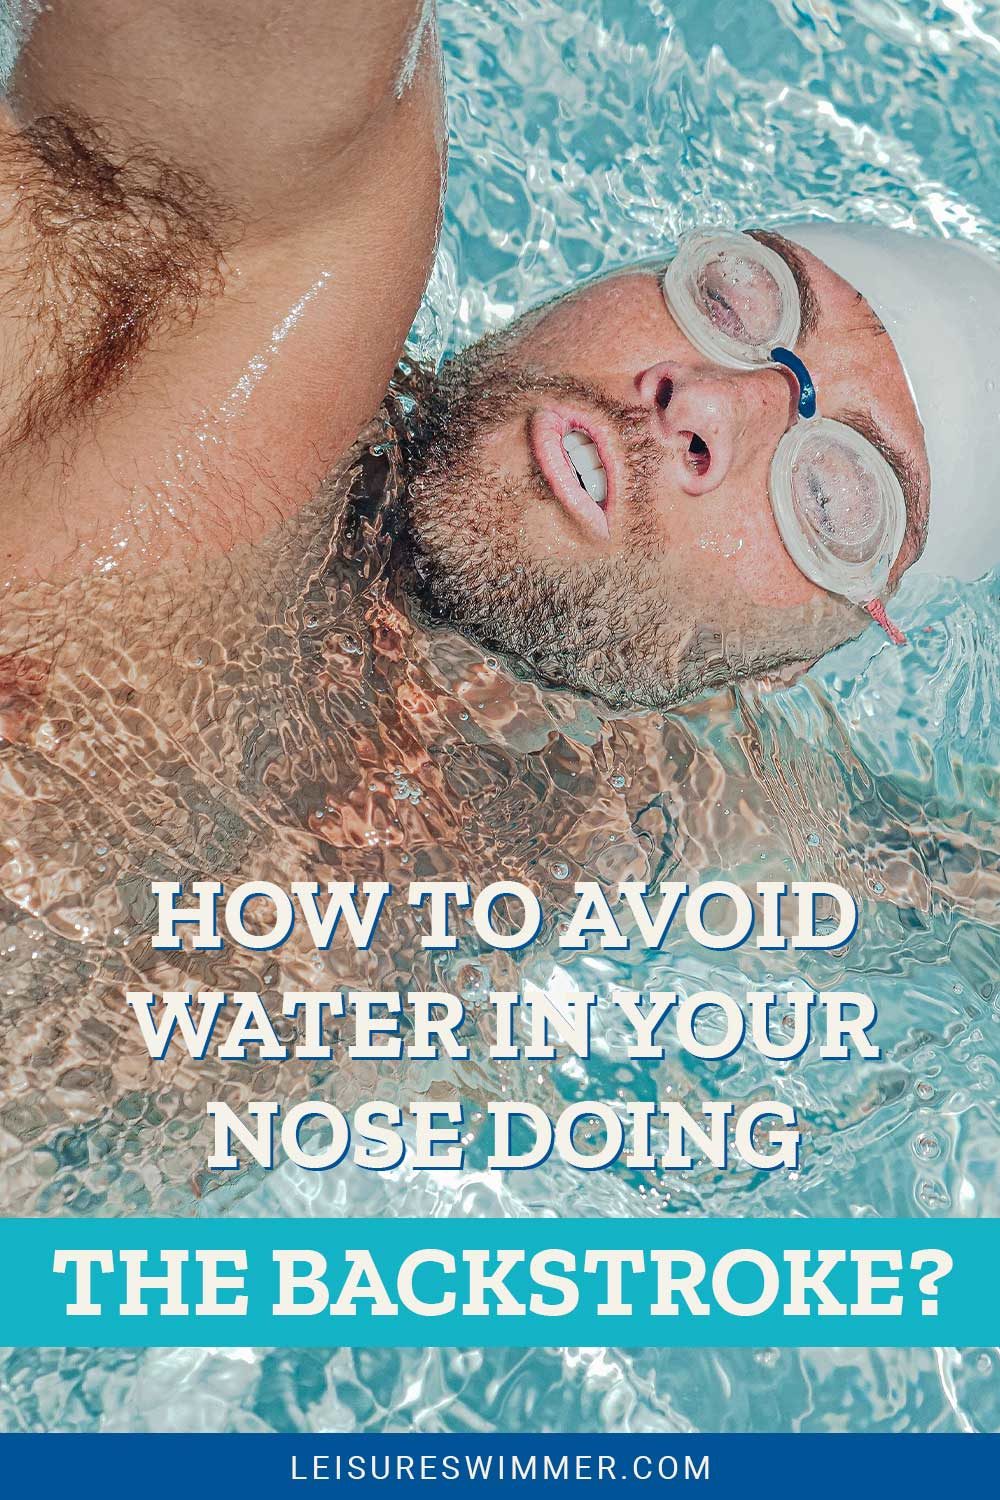 Man wearing white swimming cap swimming in pool water - How To Avoid Water In Your Nose Doing The Backstroke?